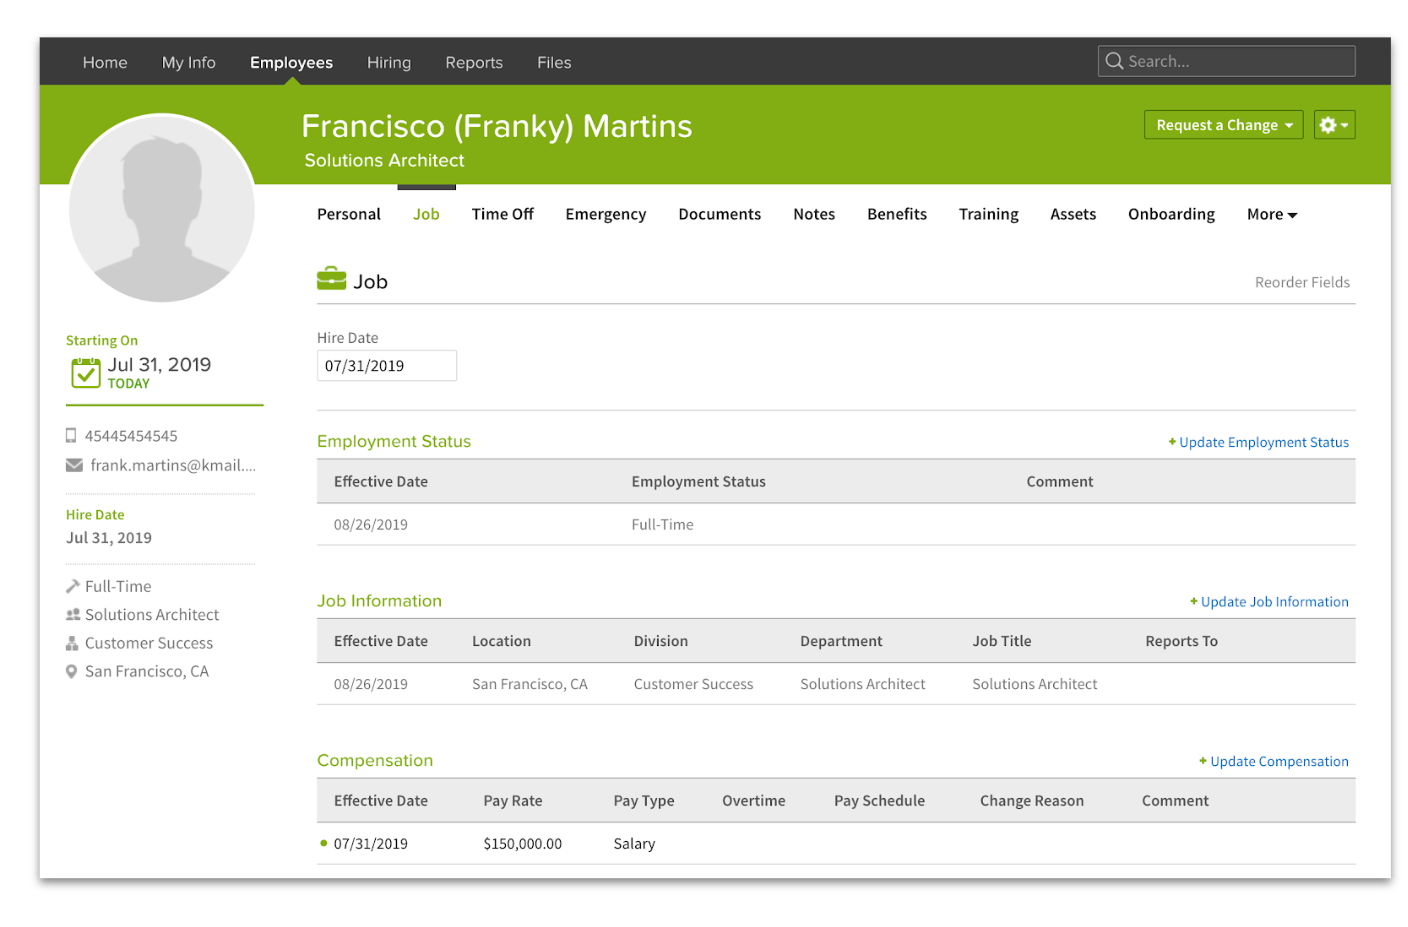 Employee record in BambooHR showing additional fields on visible in previous image.